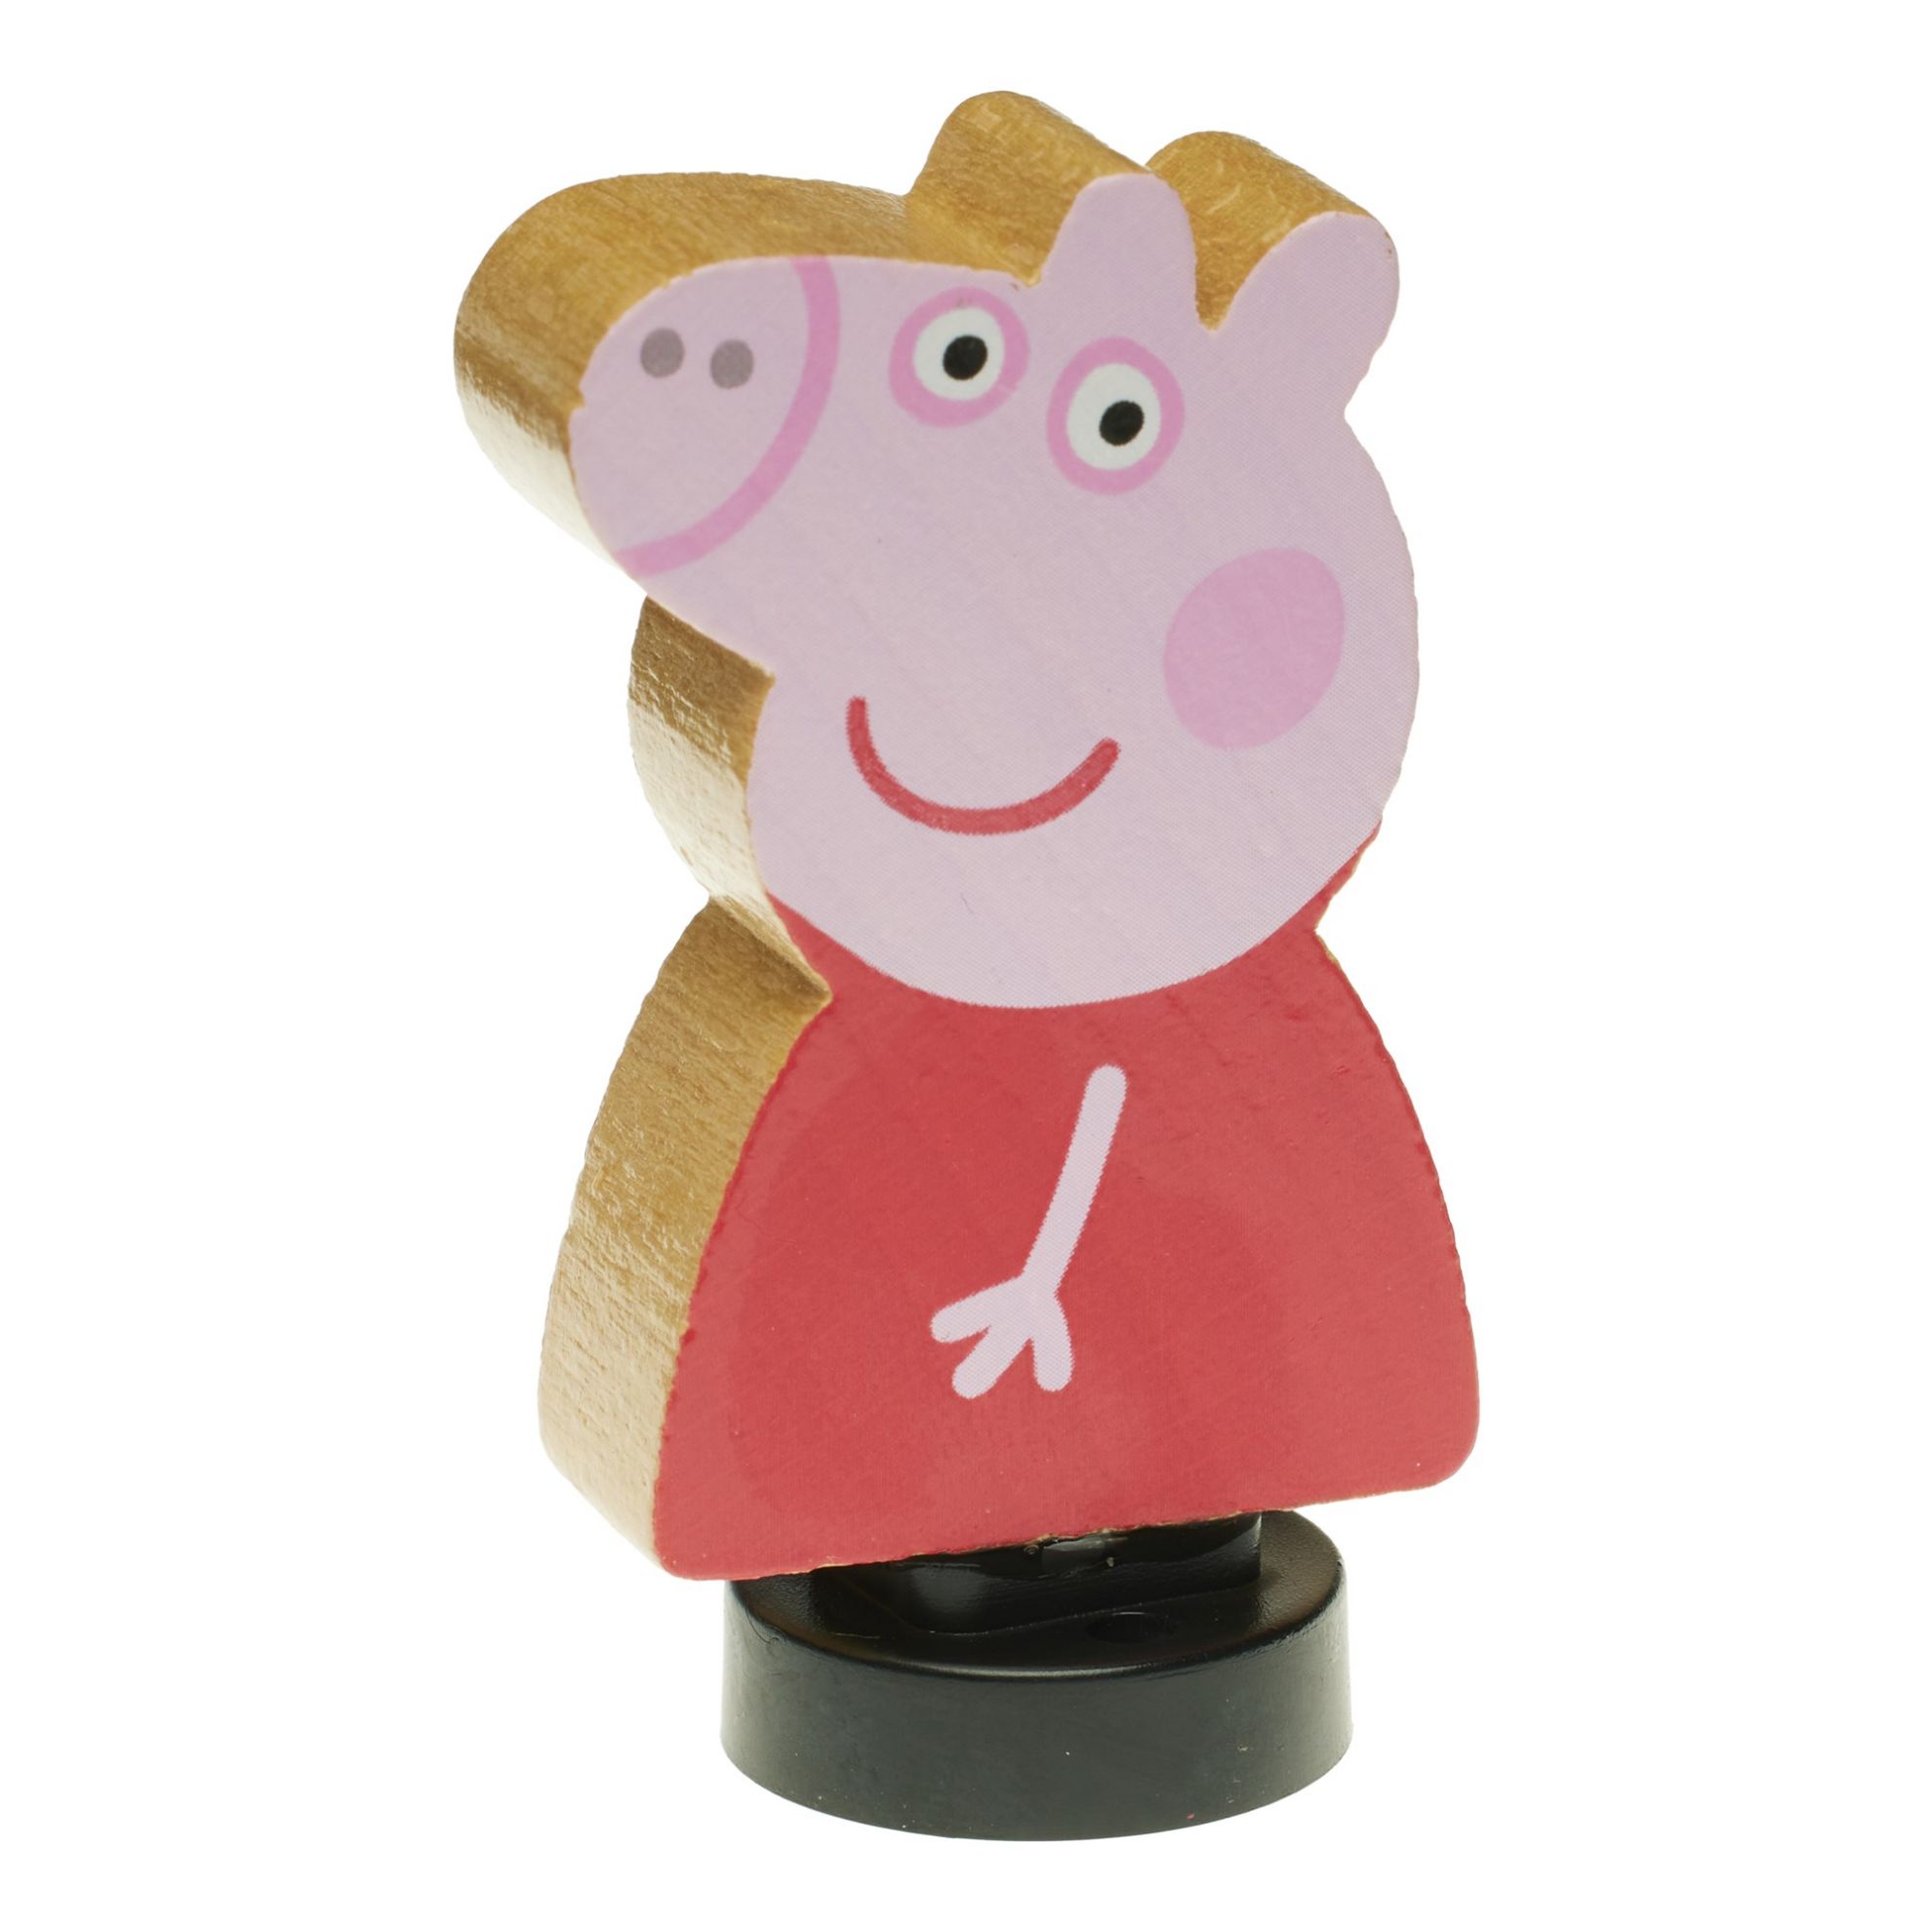 Spare Parts - Peppa Pig's Wooden Family Home - Peppa Figure